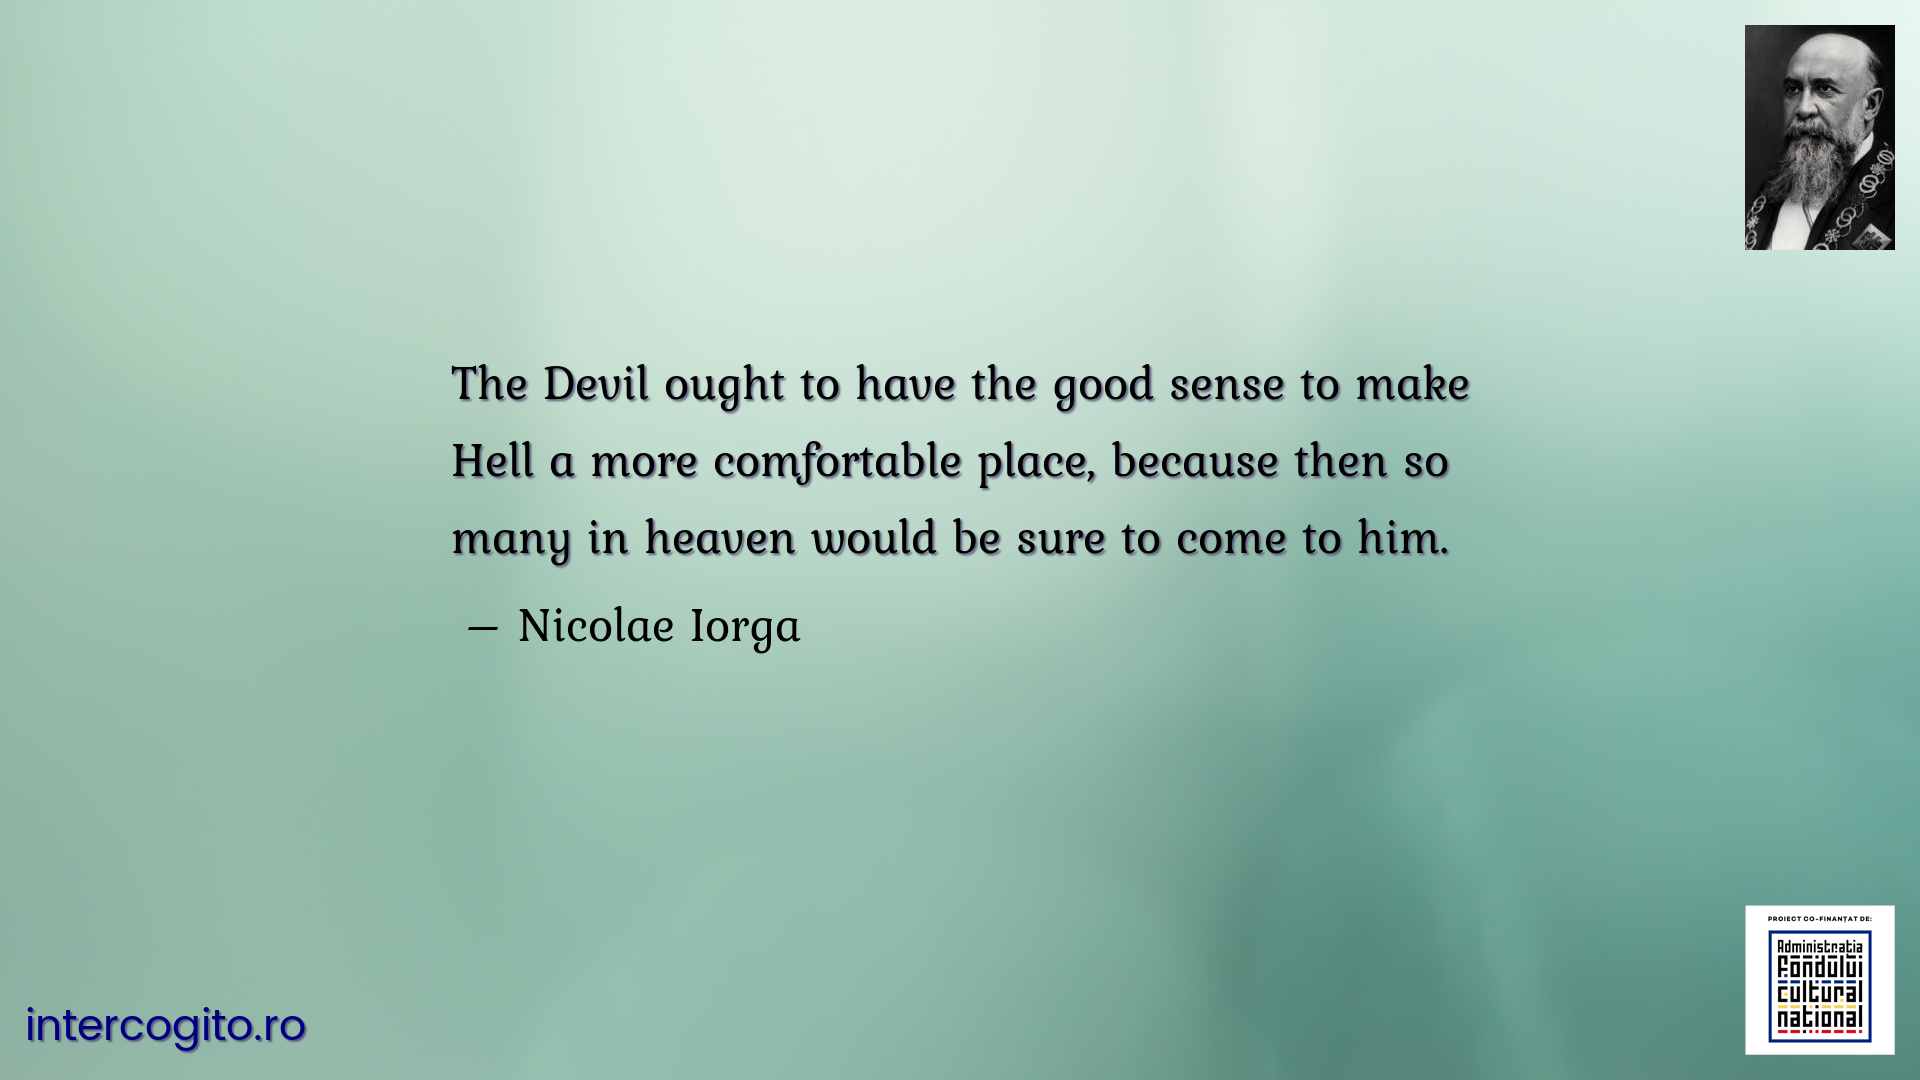 The Devil ought to have the good sense to make Hell a more comfortable place, because then so many in heaven would be sure to come to him.